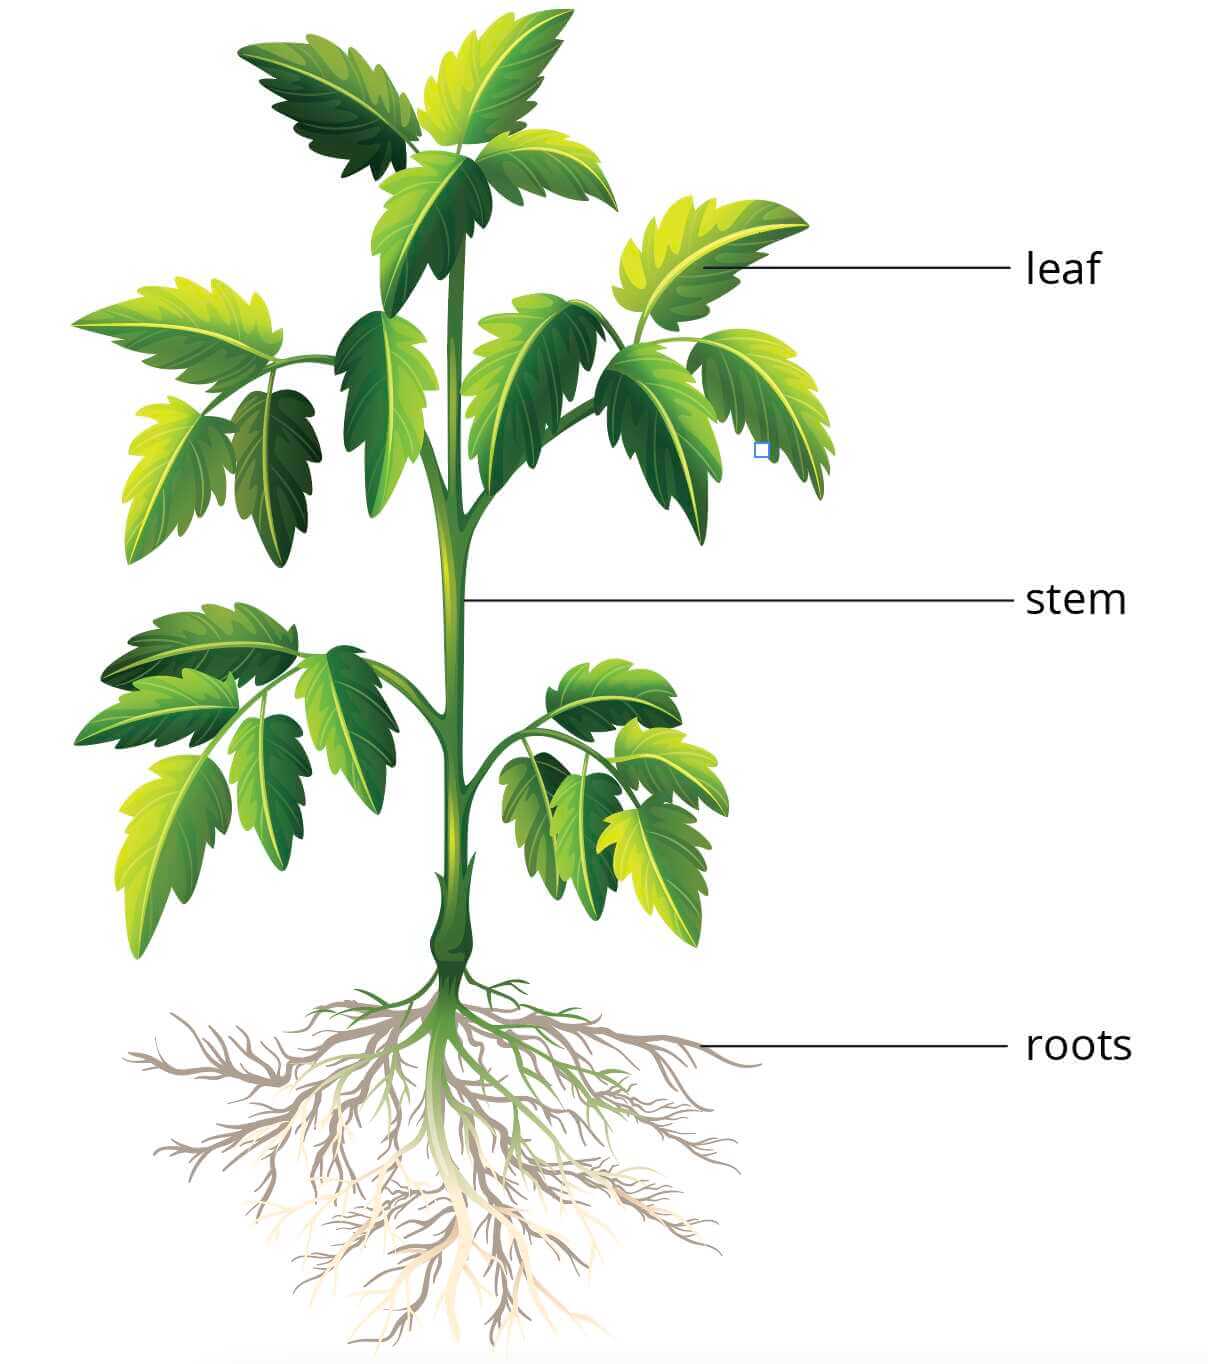 Plants and Their Parts | Primary 3 Science - Geniebook